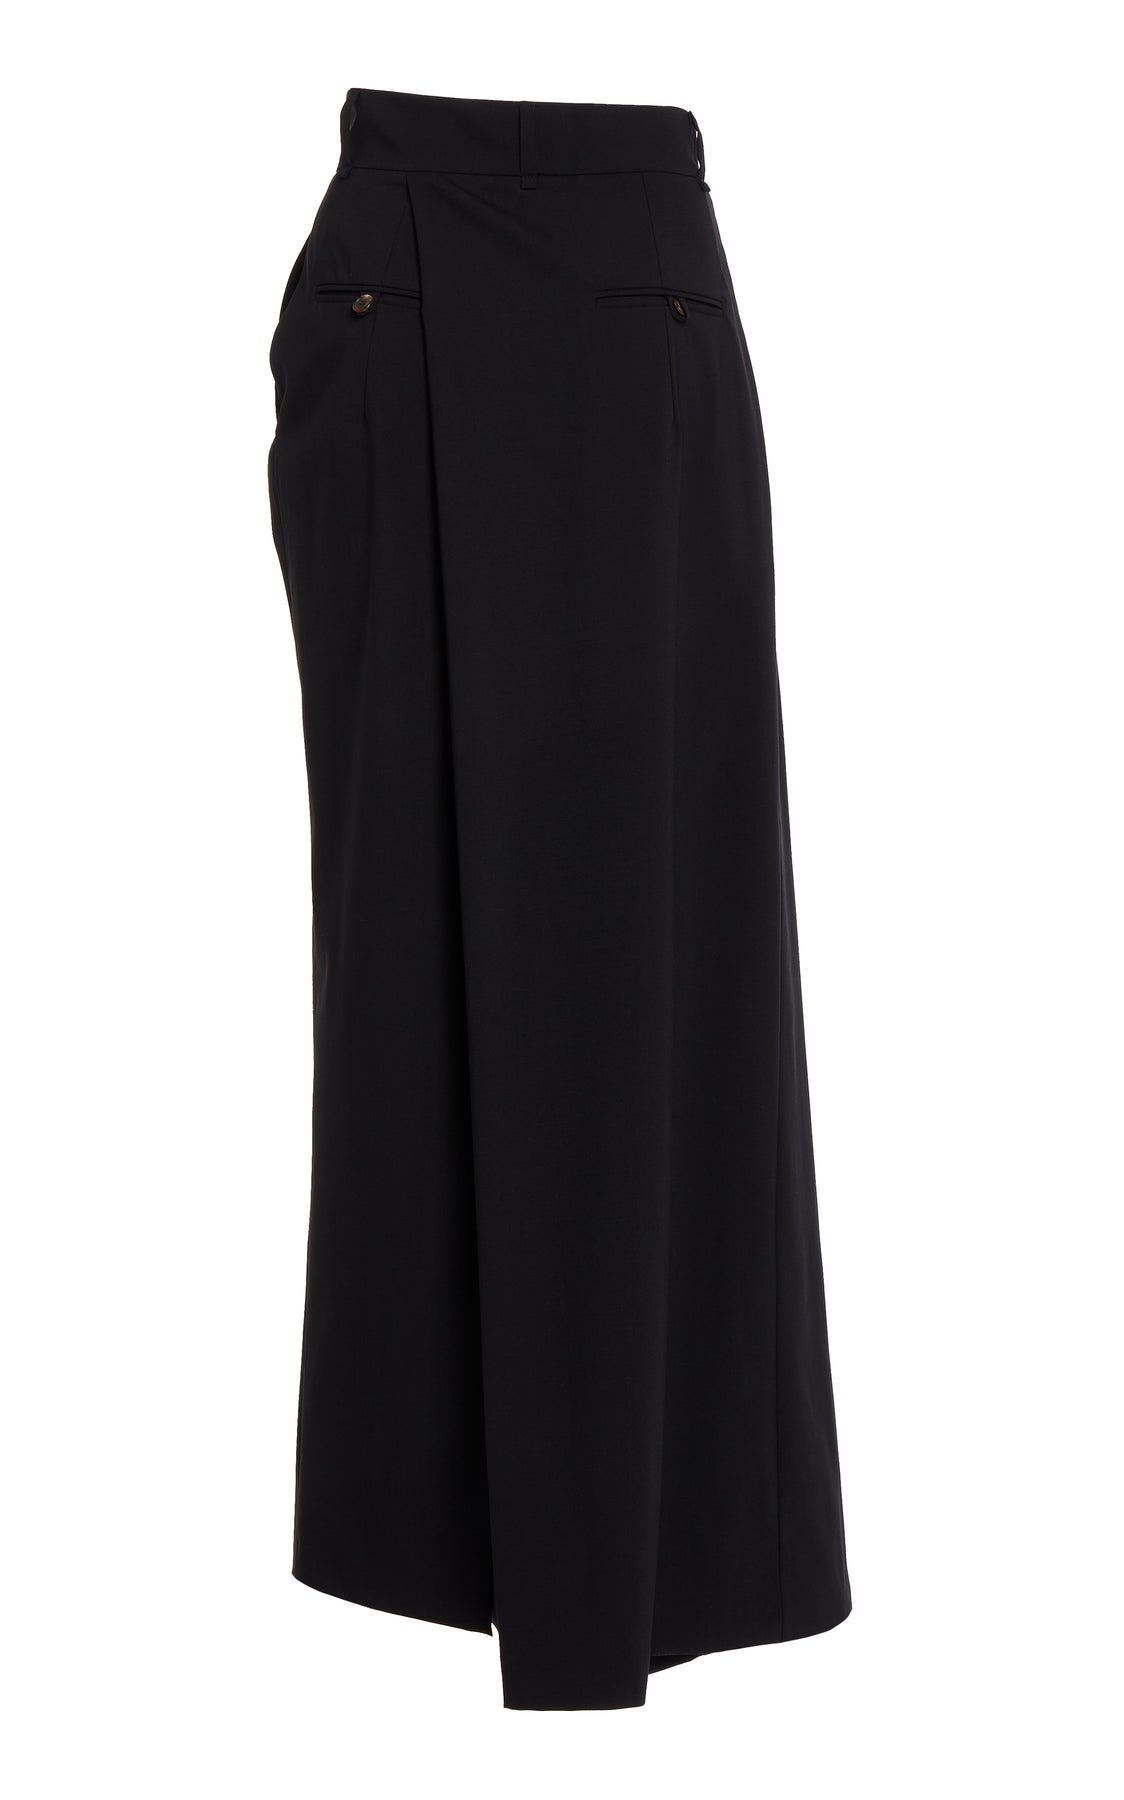 DECONSTRUCTED TROUSERS SKIRT BLACK - 10